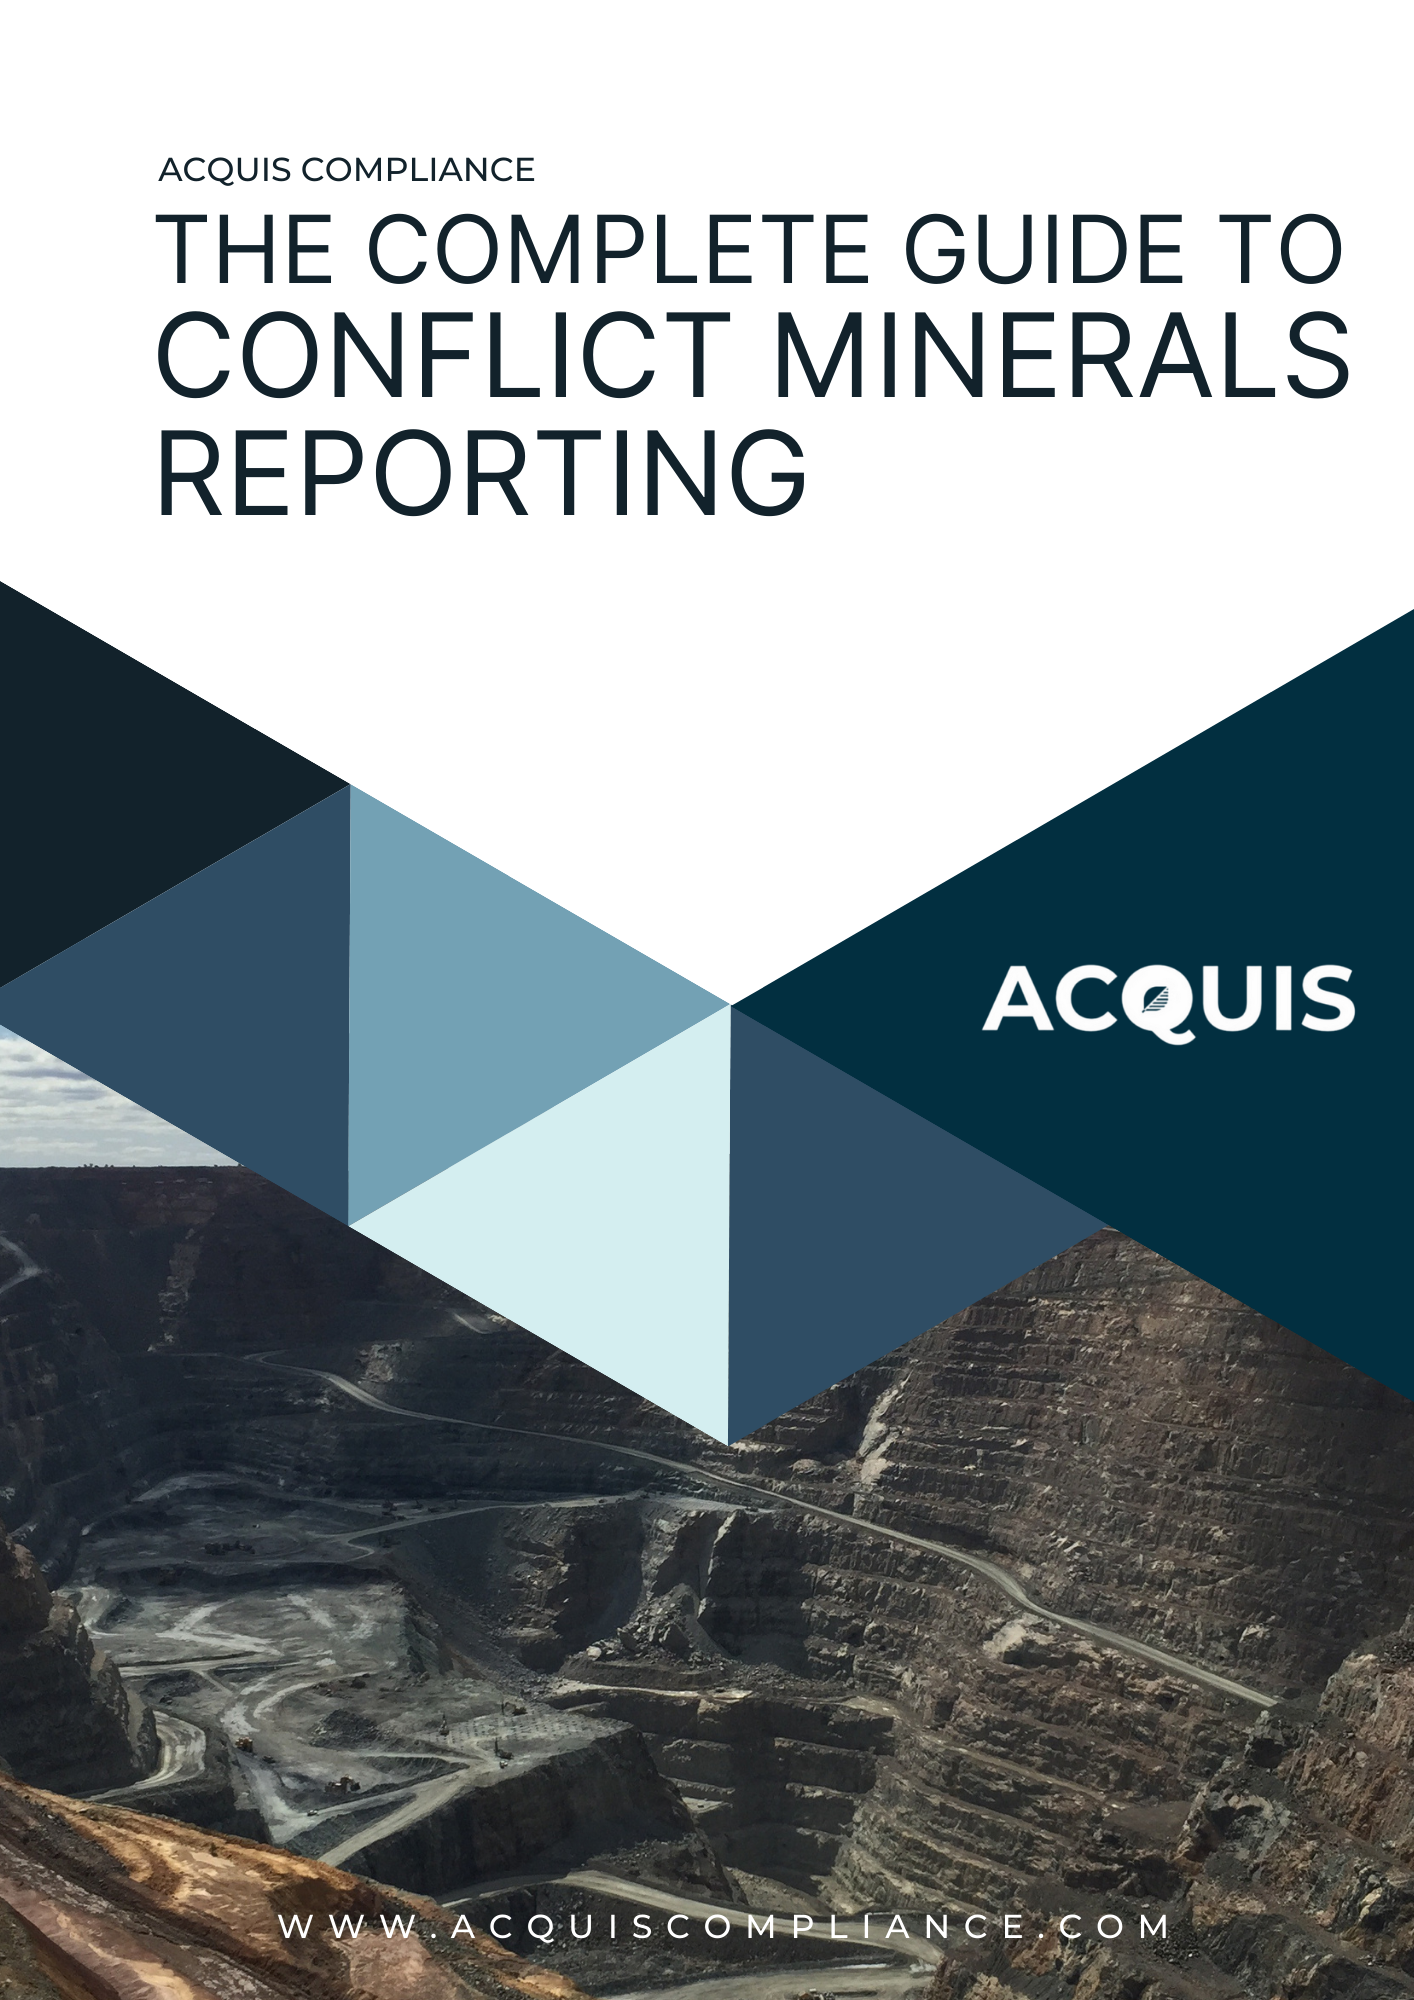 The Complete Guide to Conflict Minerals Reporting